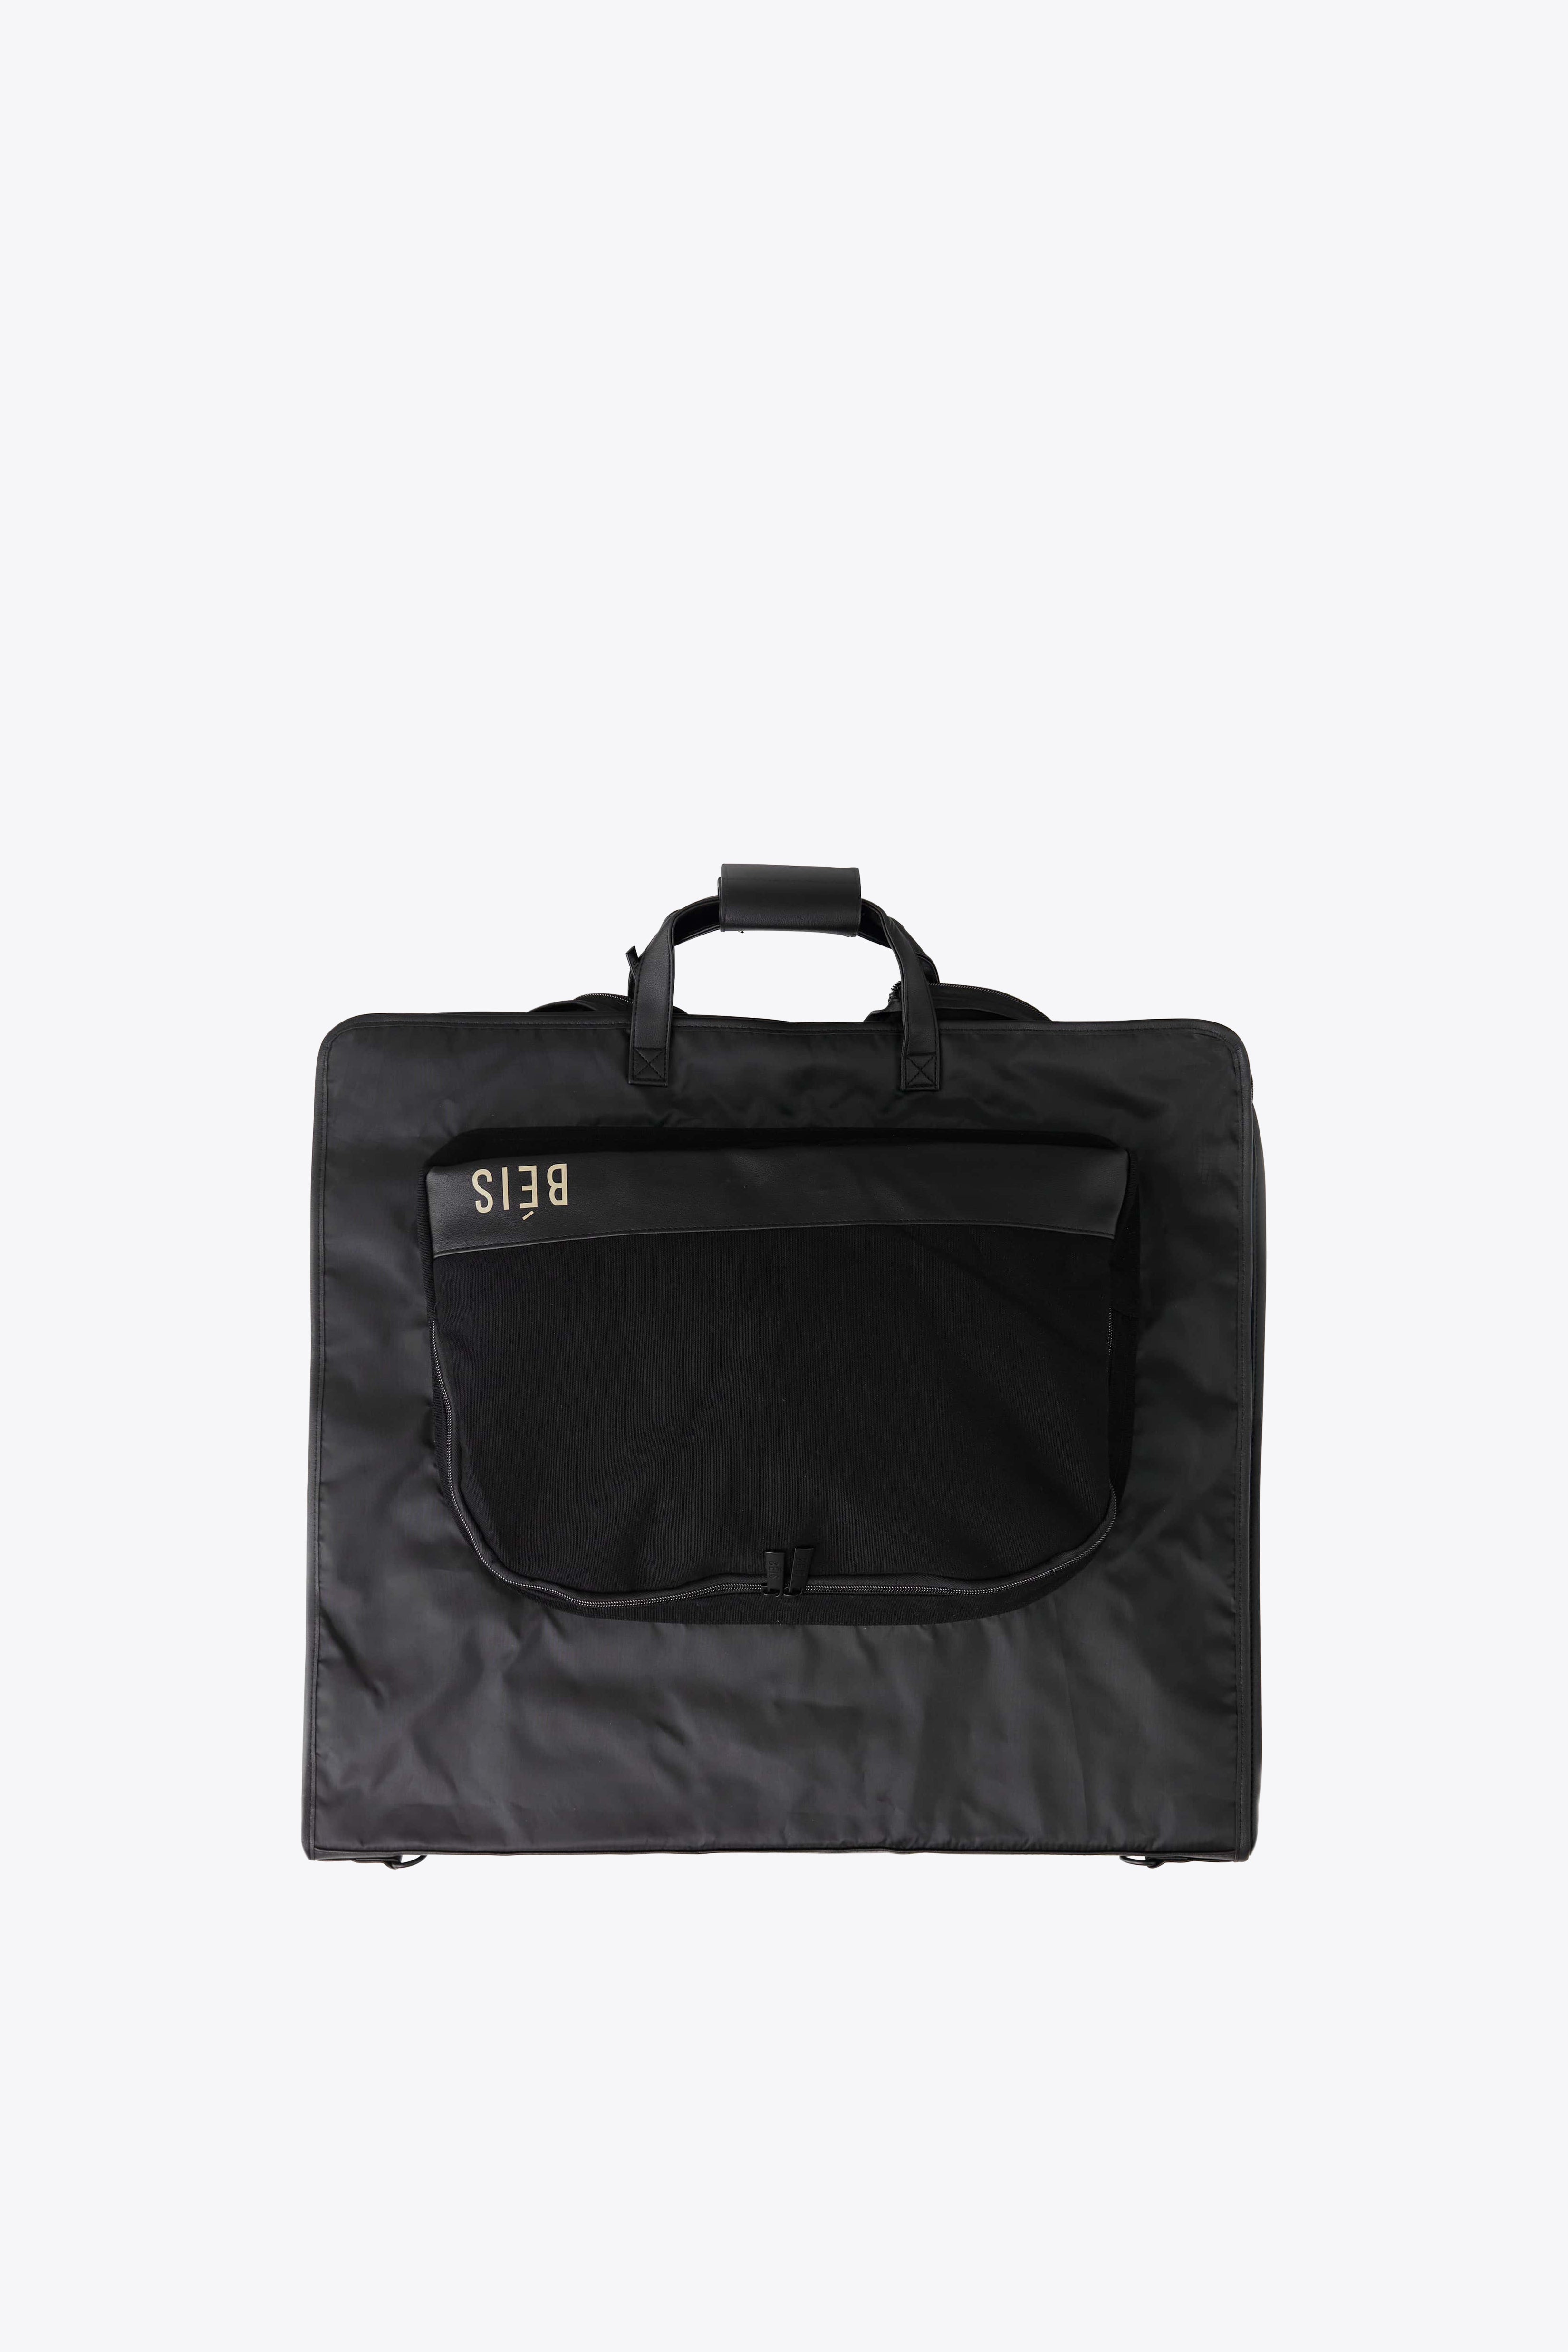 Garment Bag  Personalized kids luggage and travel bags